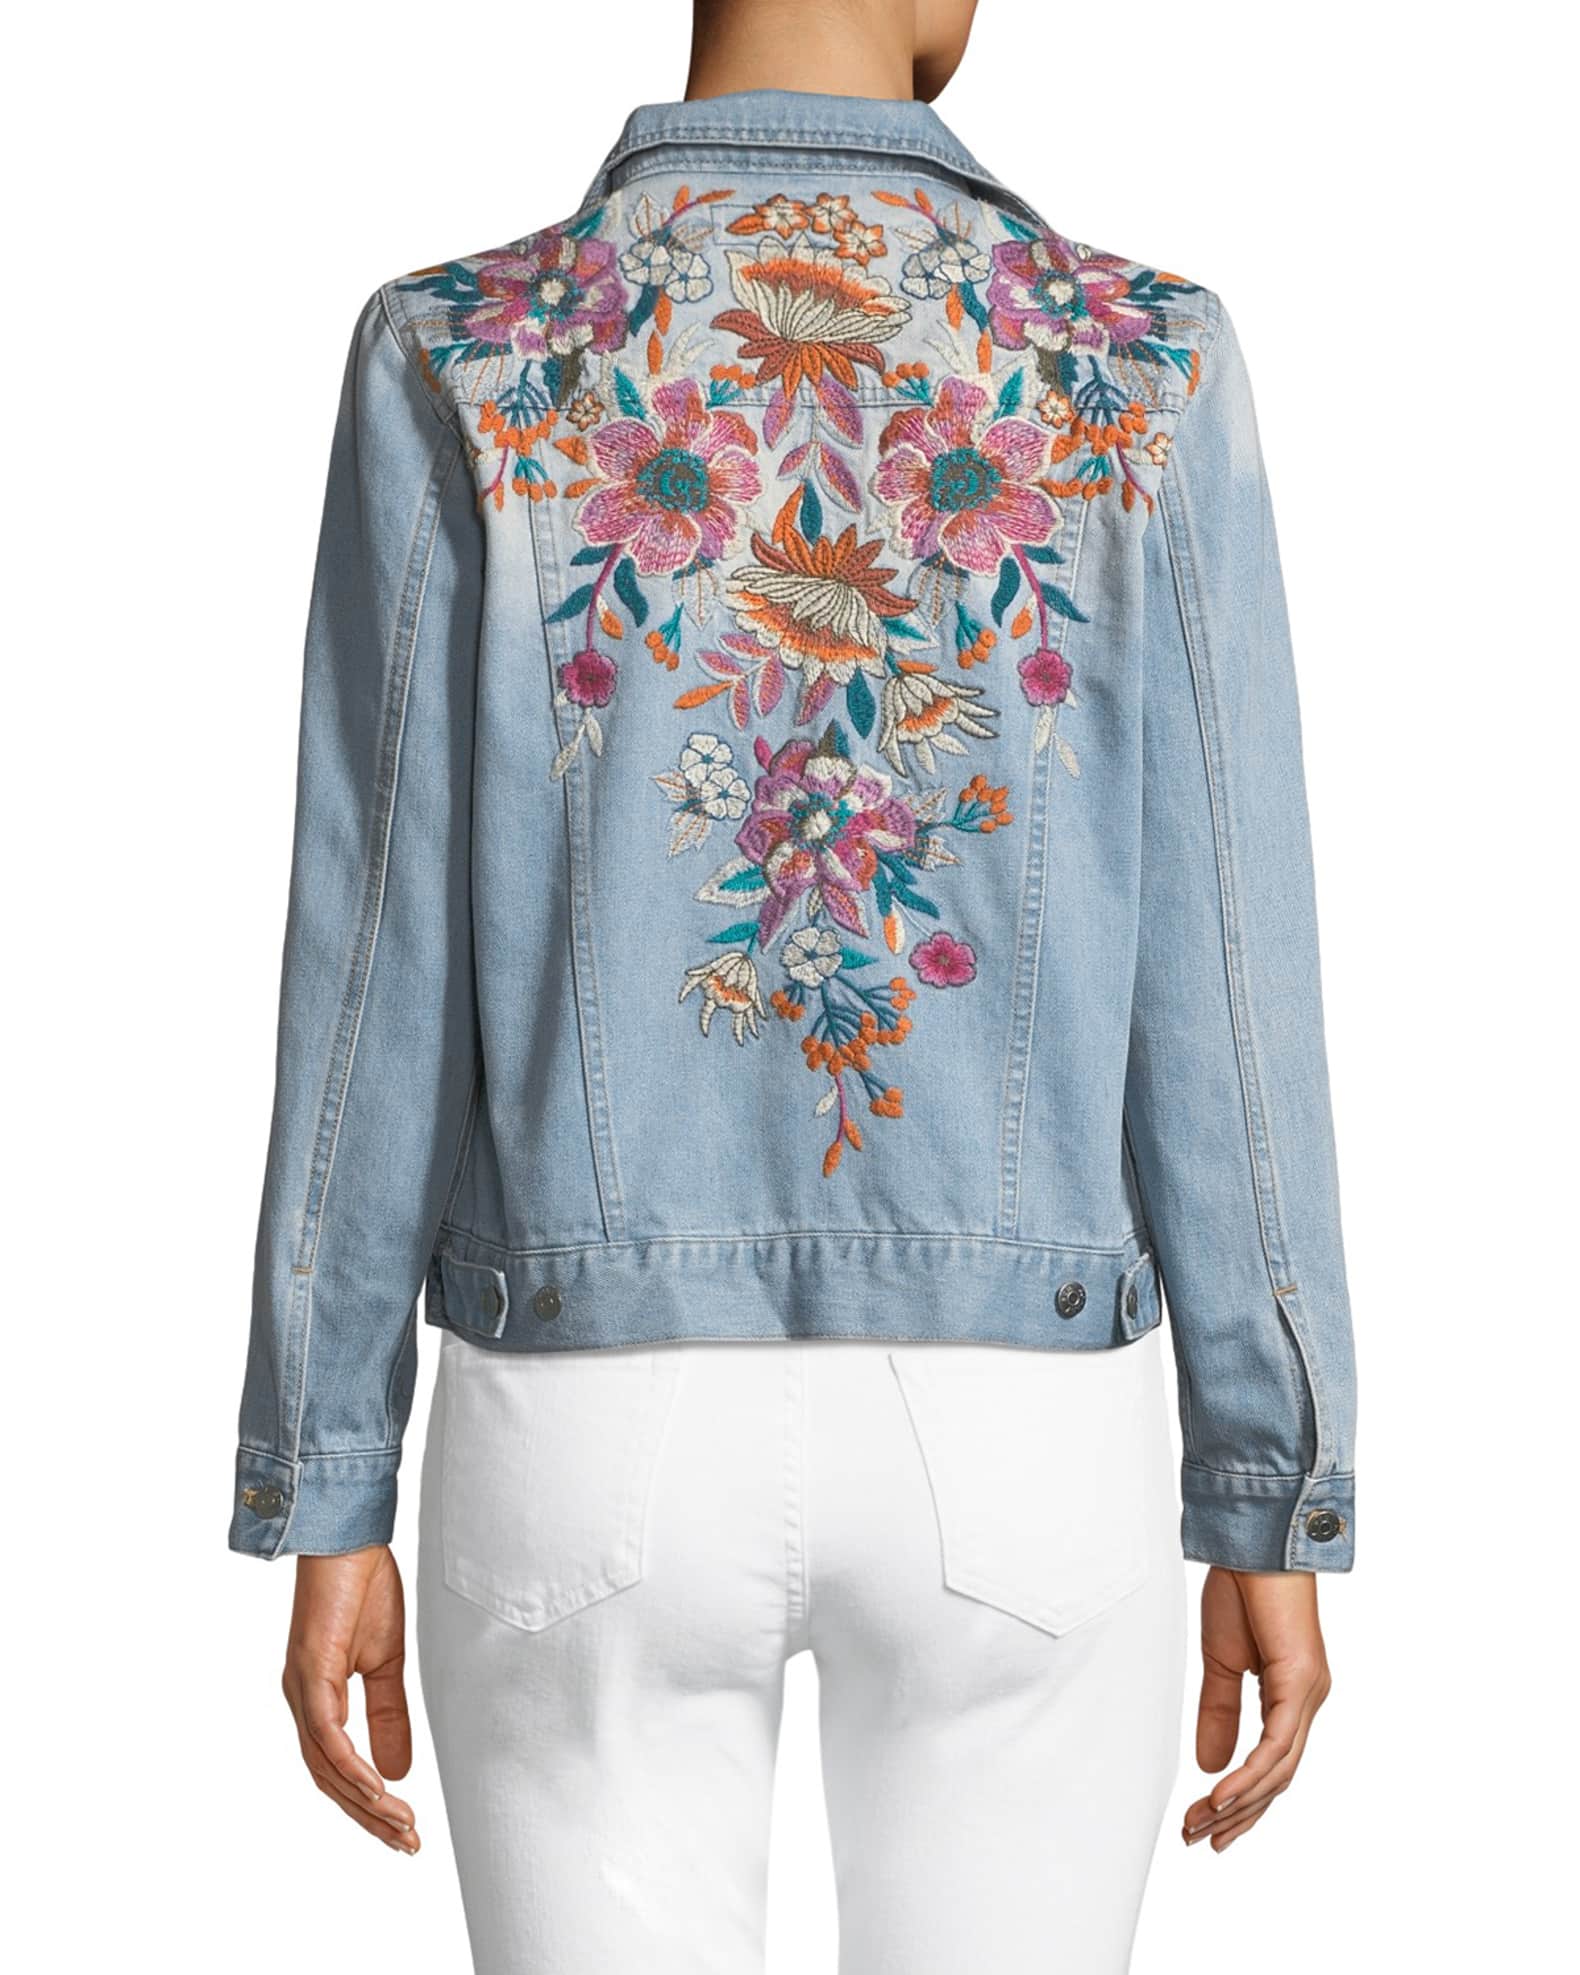 Nena Embroidered Denim Jacket and Matching Items | Neiman Marcus